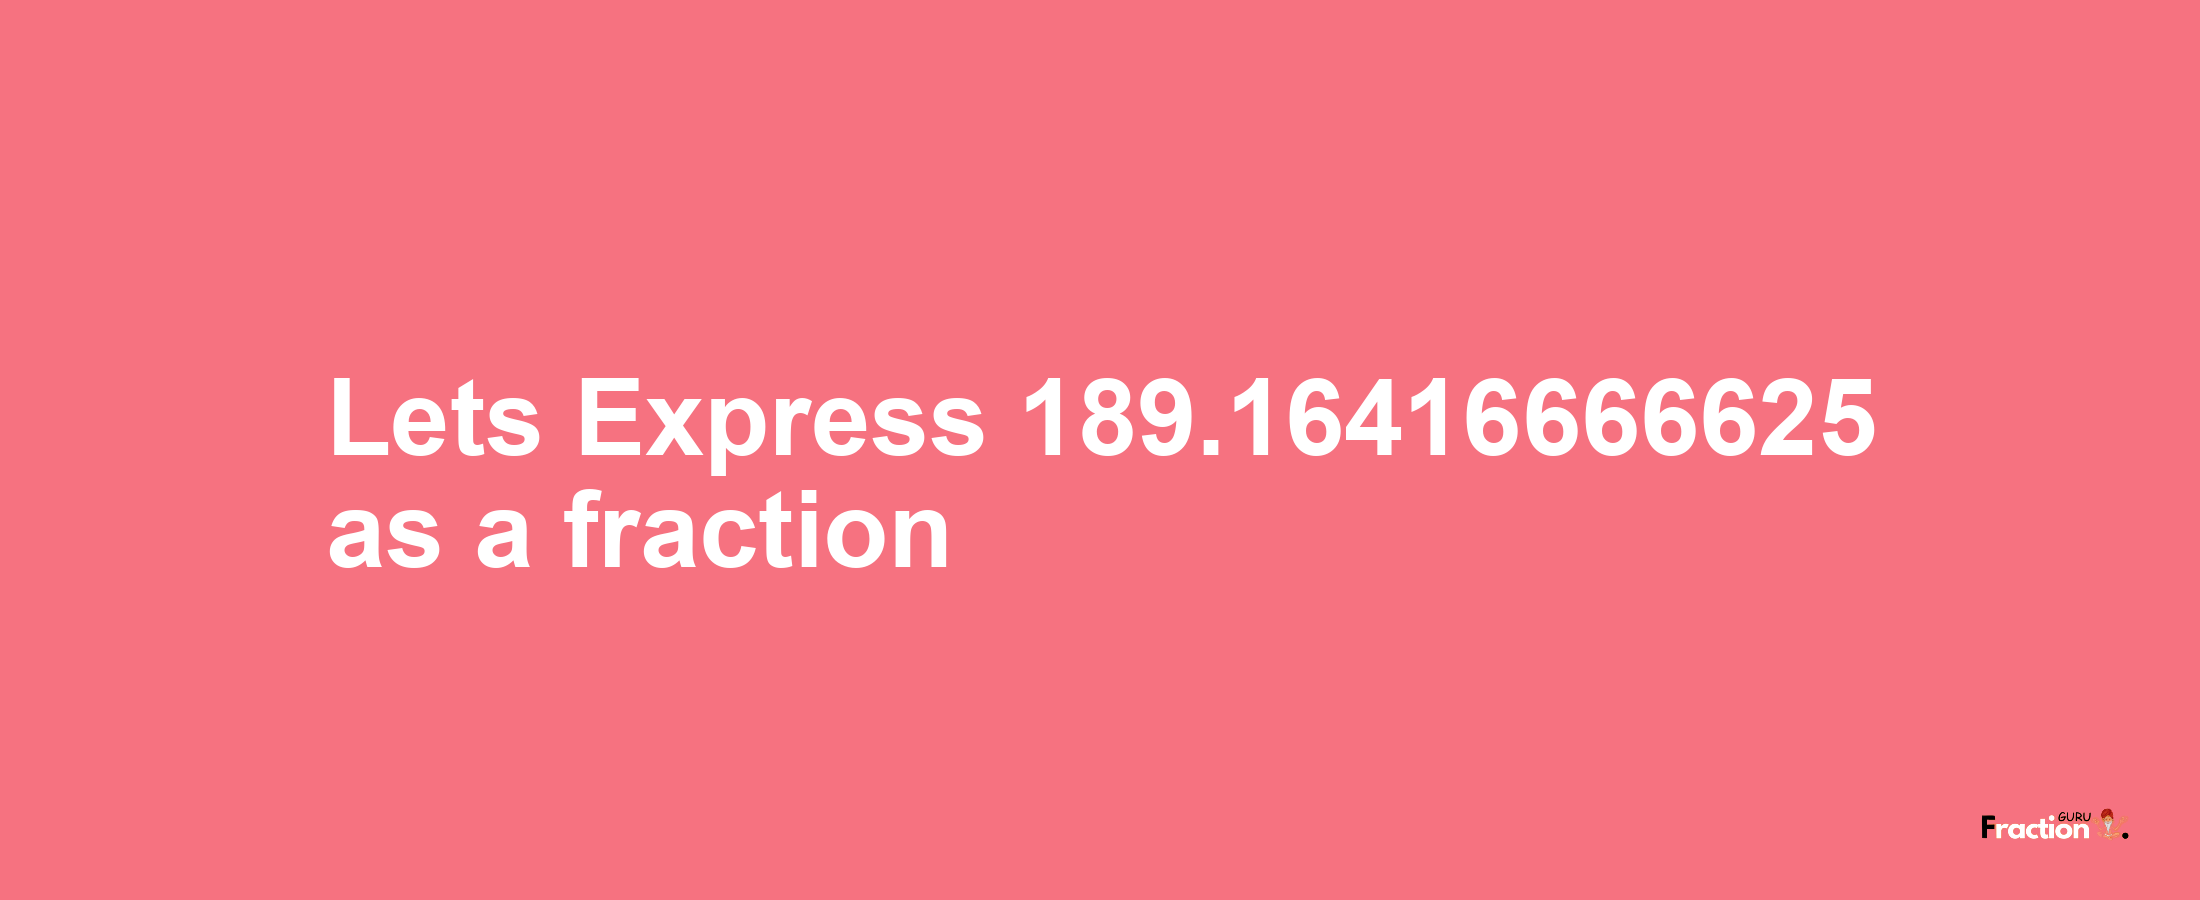 Lets Express 189.16416666625 as afraction